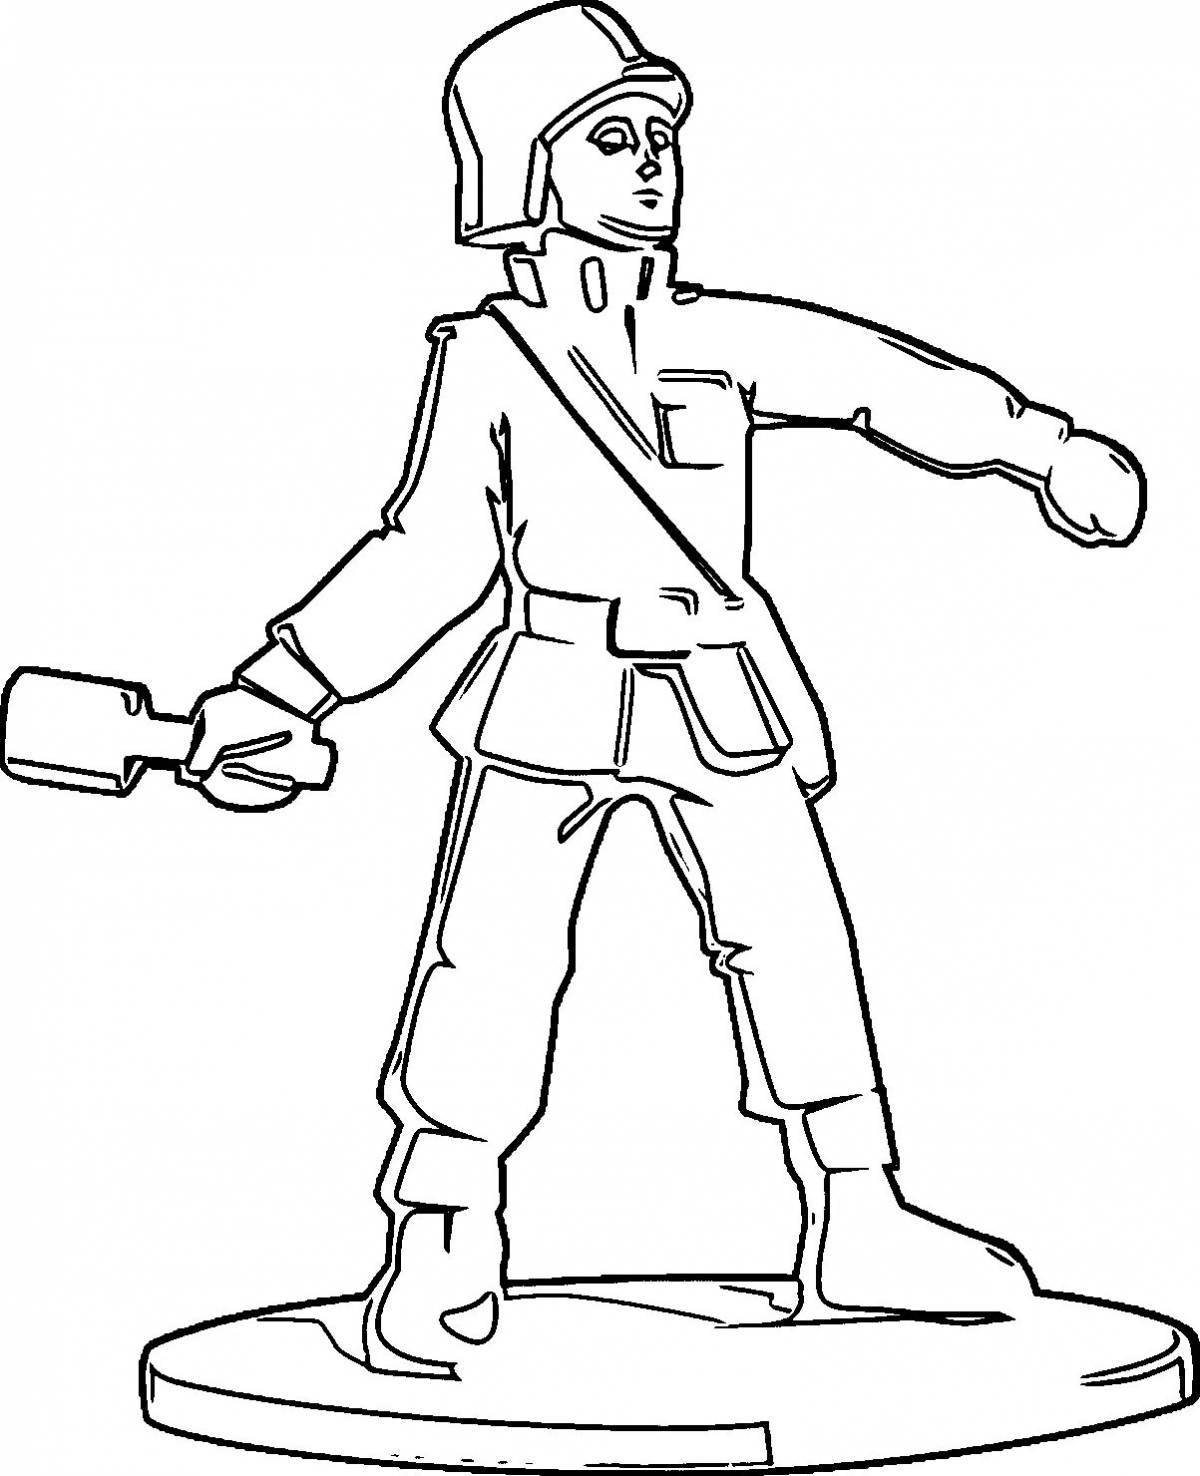 Coloring page unstoppable senior soldiers